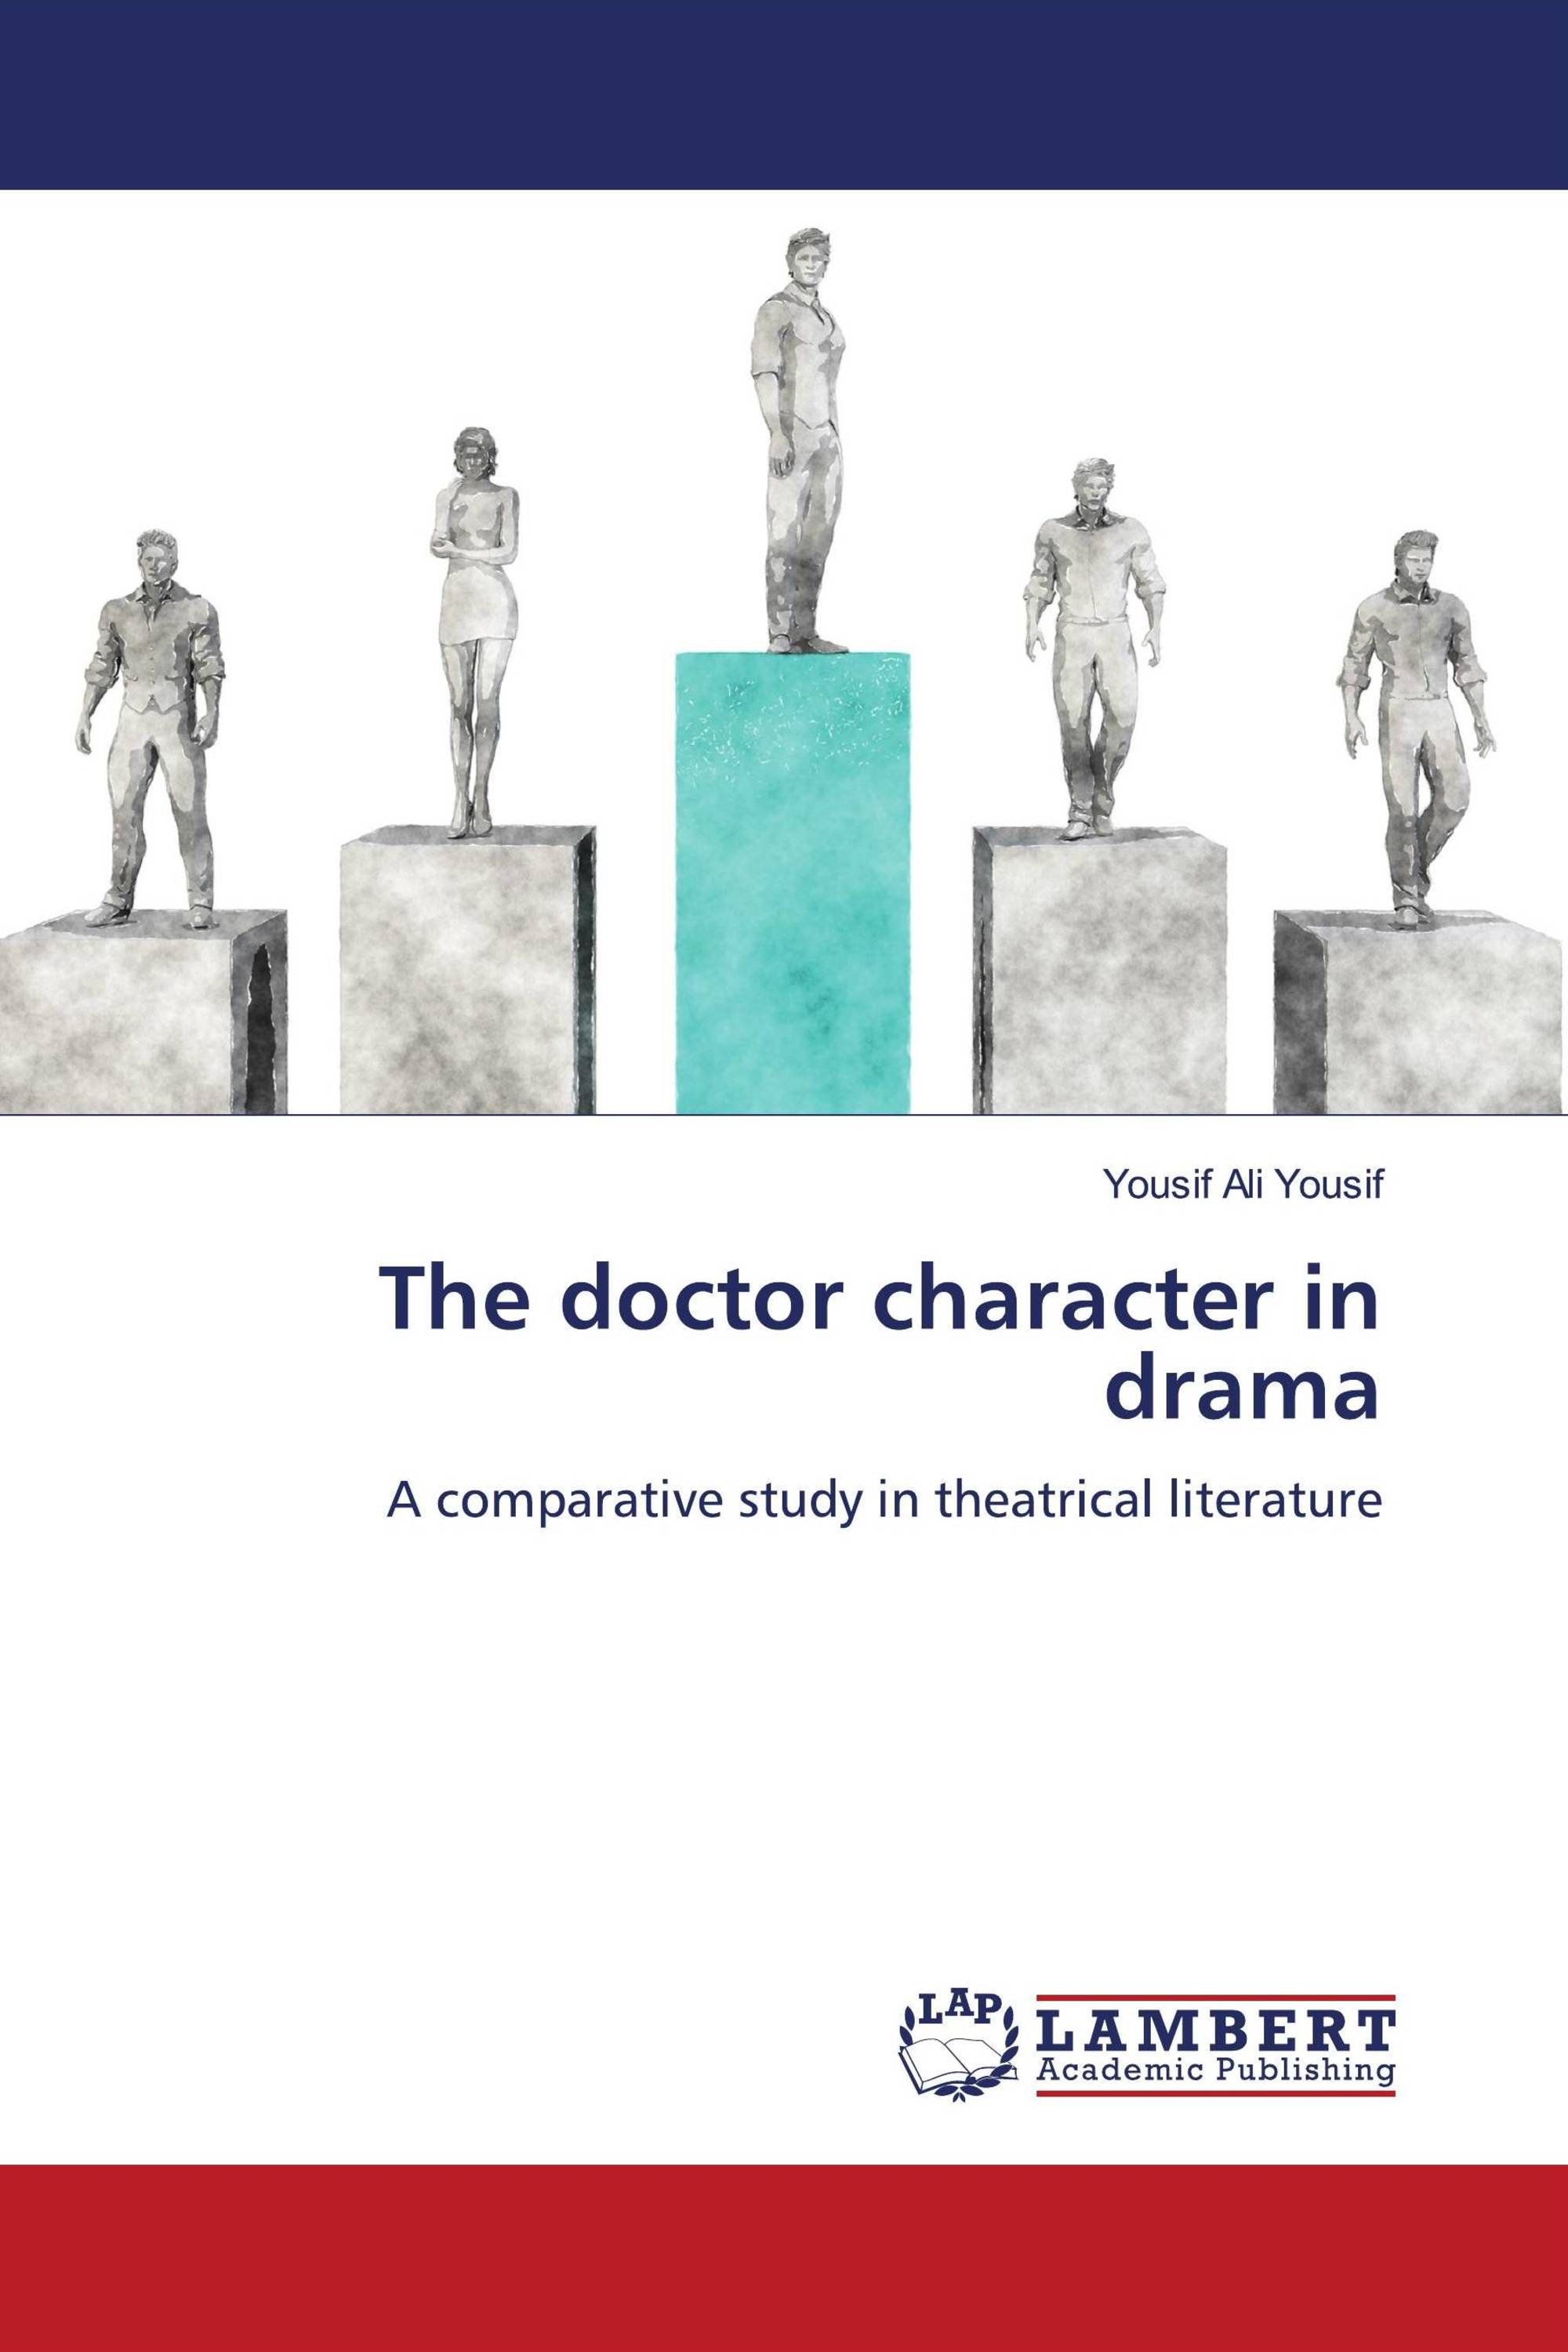 The doctor character in drama